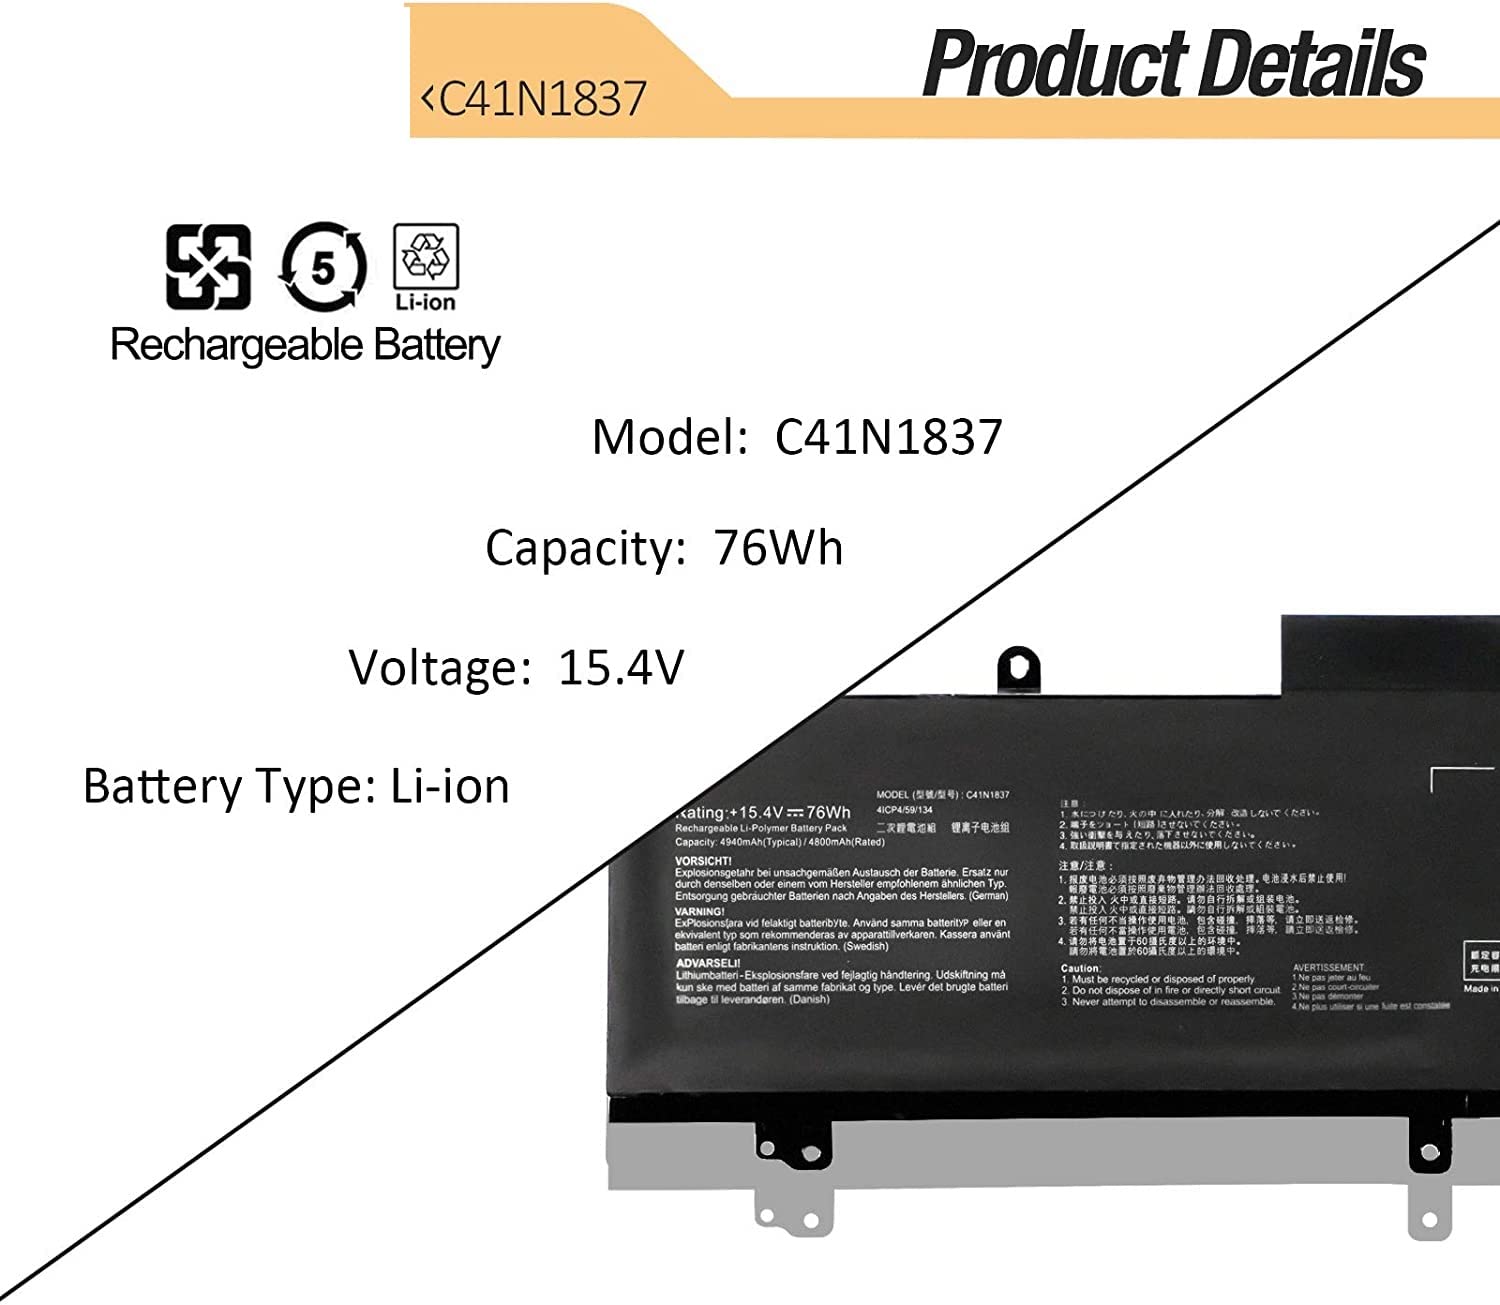 C41N1837 Laptop Battery Replacement for ASUS ROG Zephyrus GA502 GA502D GA502DU GA502GU GA502IV GU502 GU502DU GU502GV GU502LU GU502LW GU502LV GX502LXS GX502GV GX502GW GU532 GX532 GX532GV GX532GW